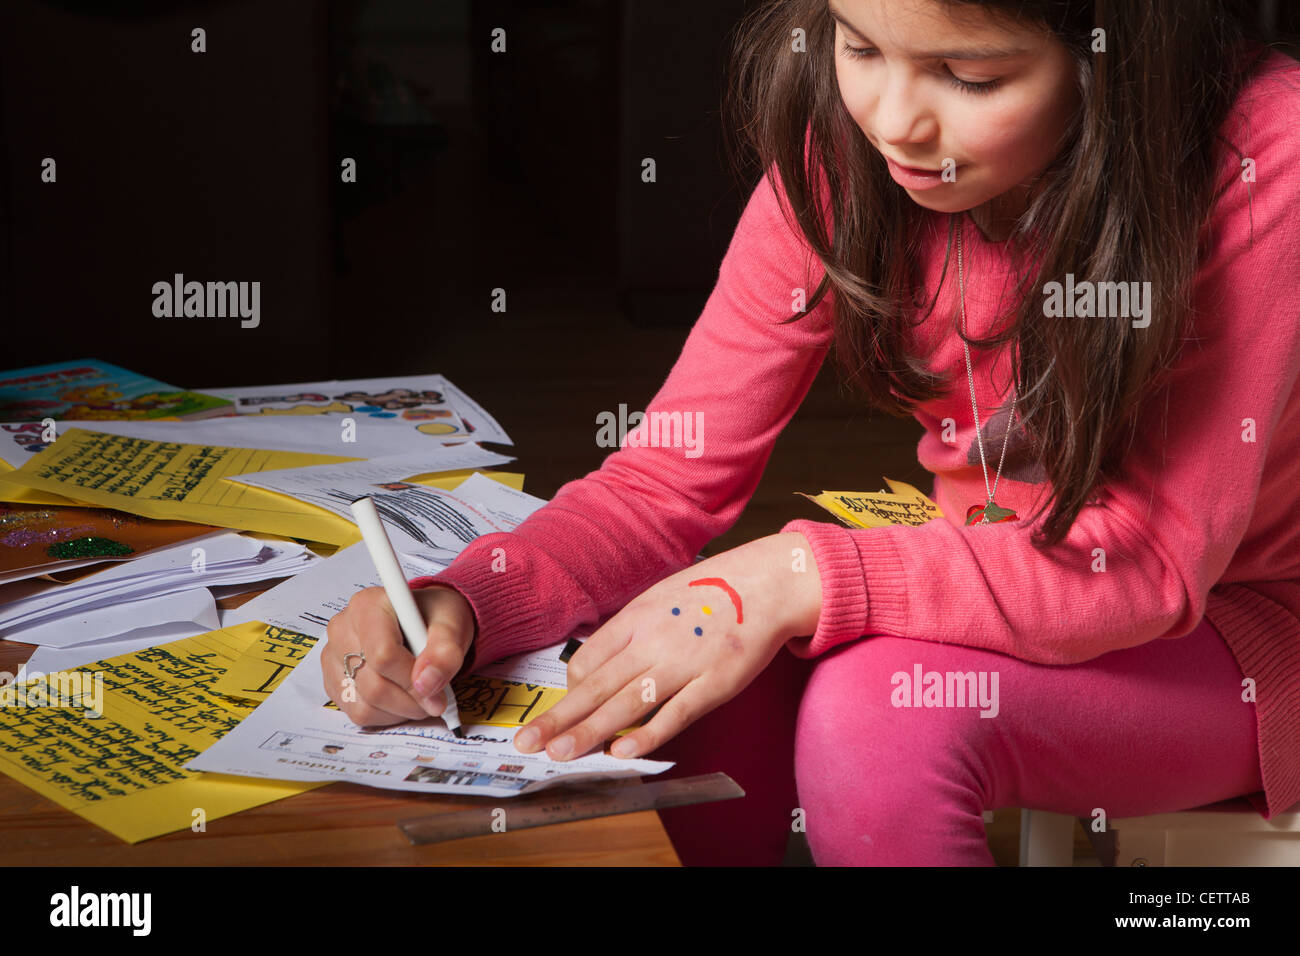 Schoolgirl working on a school project at home alone Stock Photo